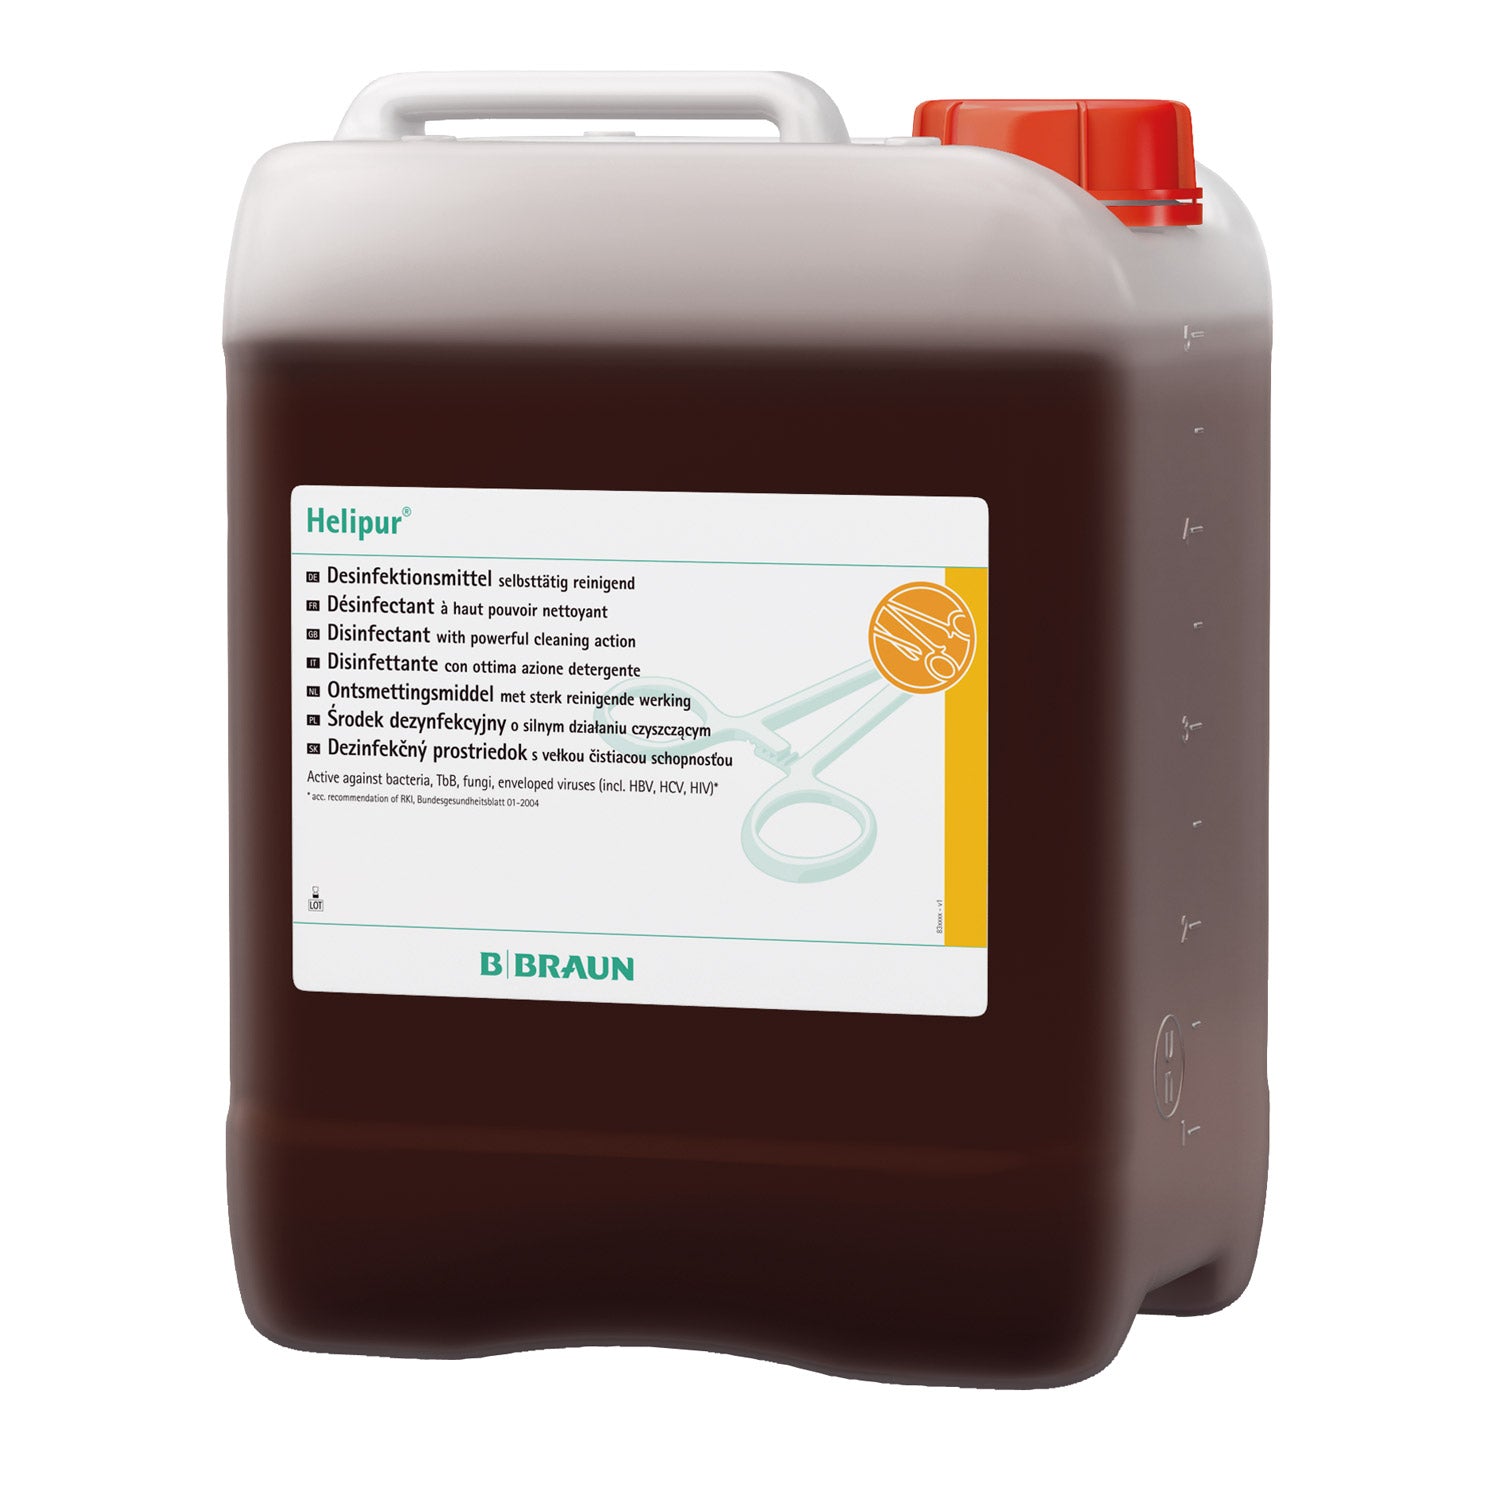 Helipur Disinfectant Concentrate For Medical Instruments